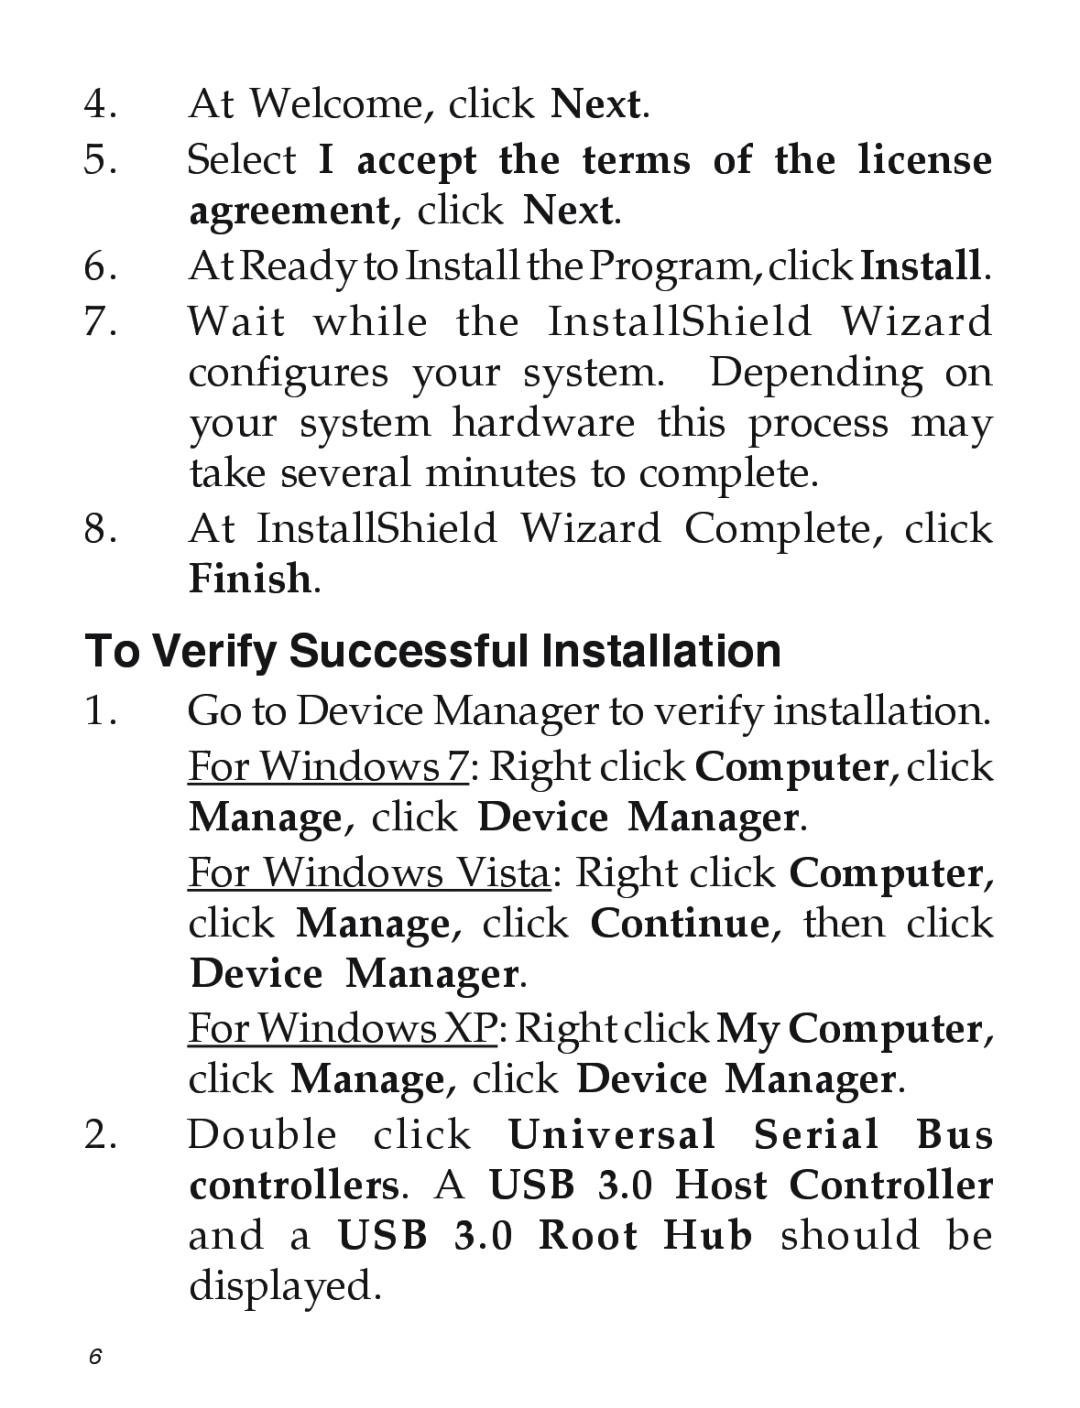 SIIG EX2101 manual To Verify Successful Installation, Select I accept the terms of the license agreement, click Next 